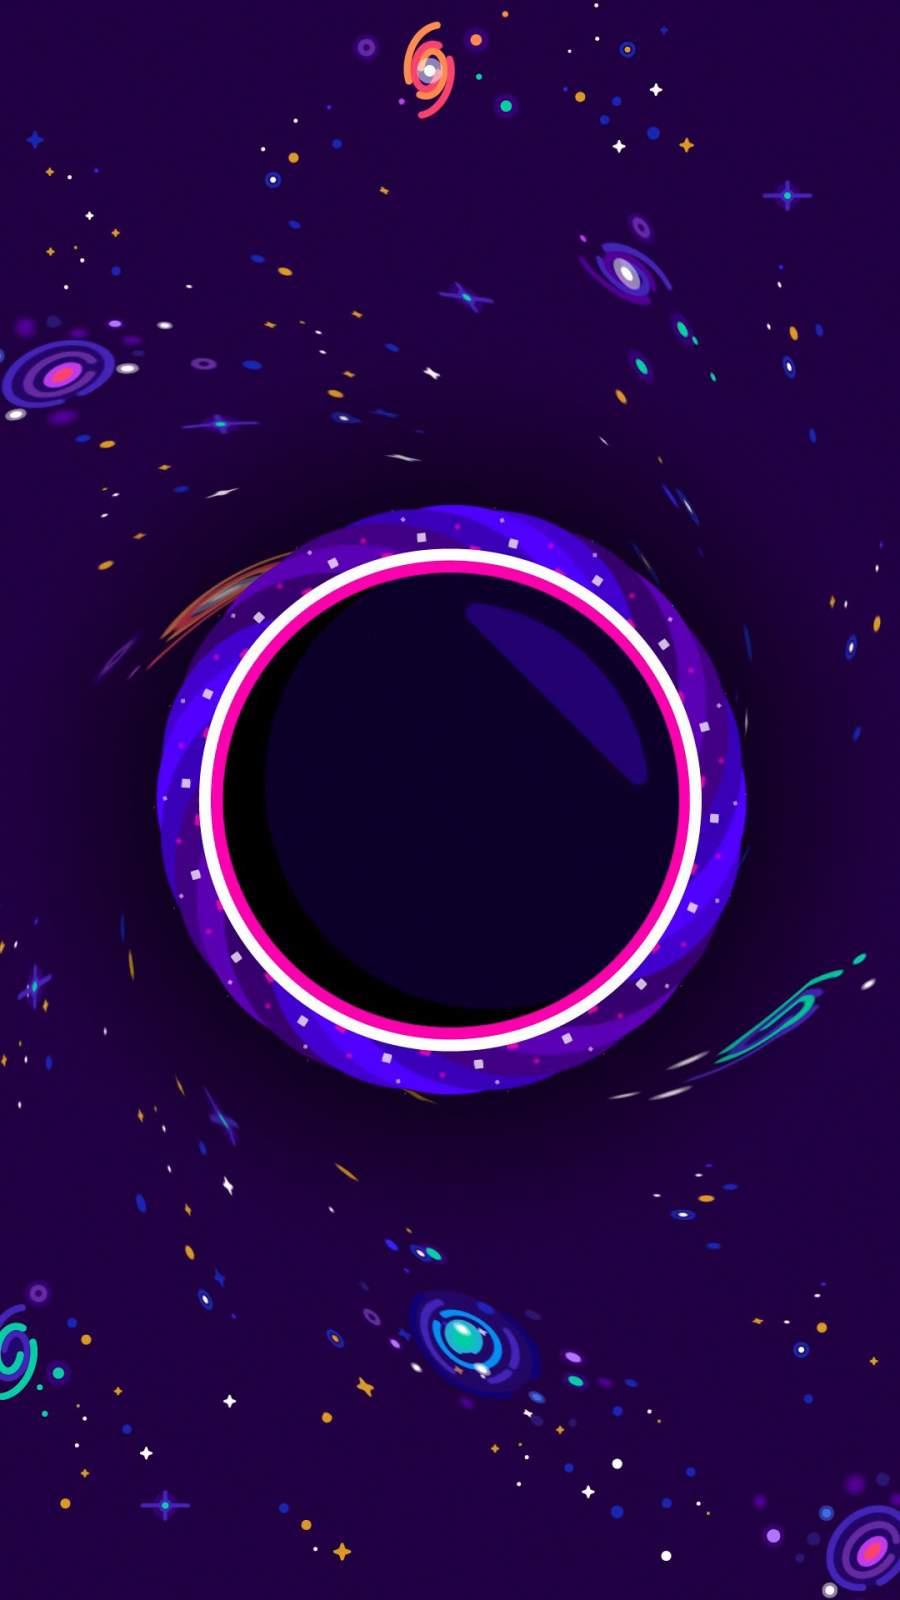 Black Hole Iphone Wallpaper - Iphone Wallpapers